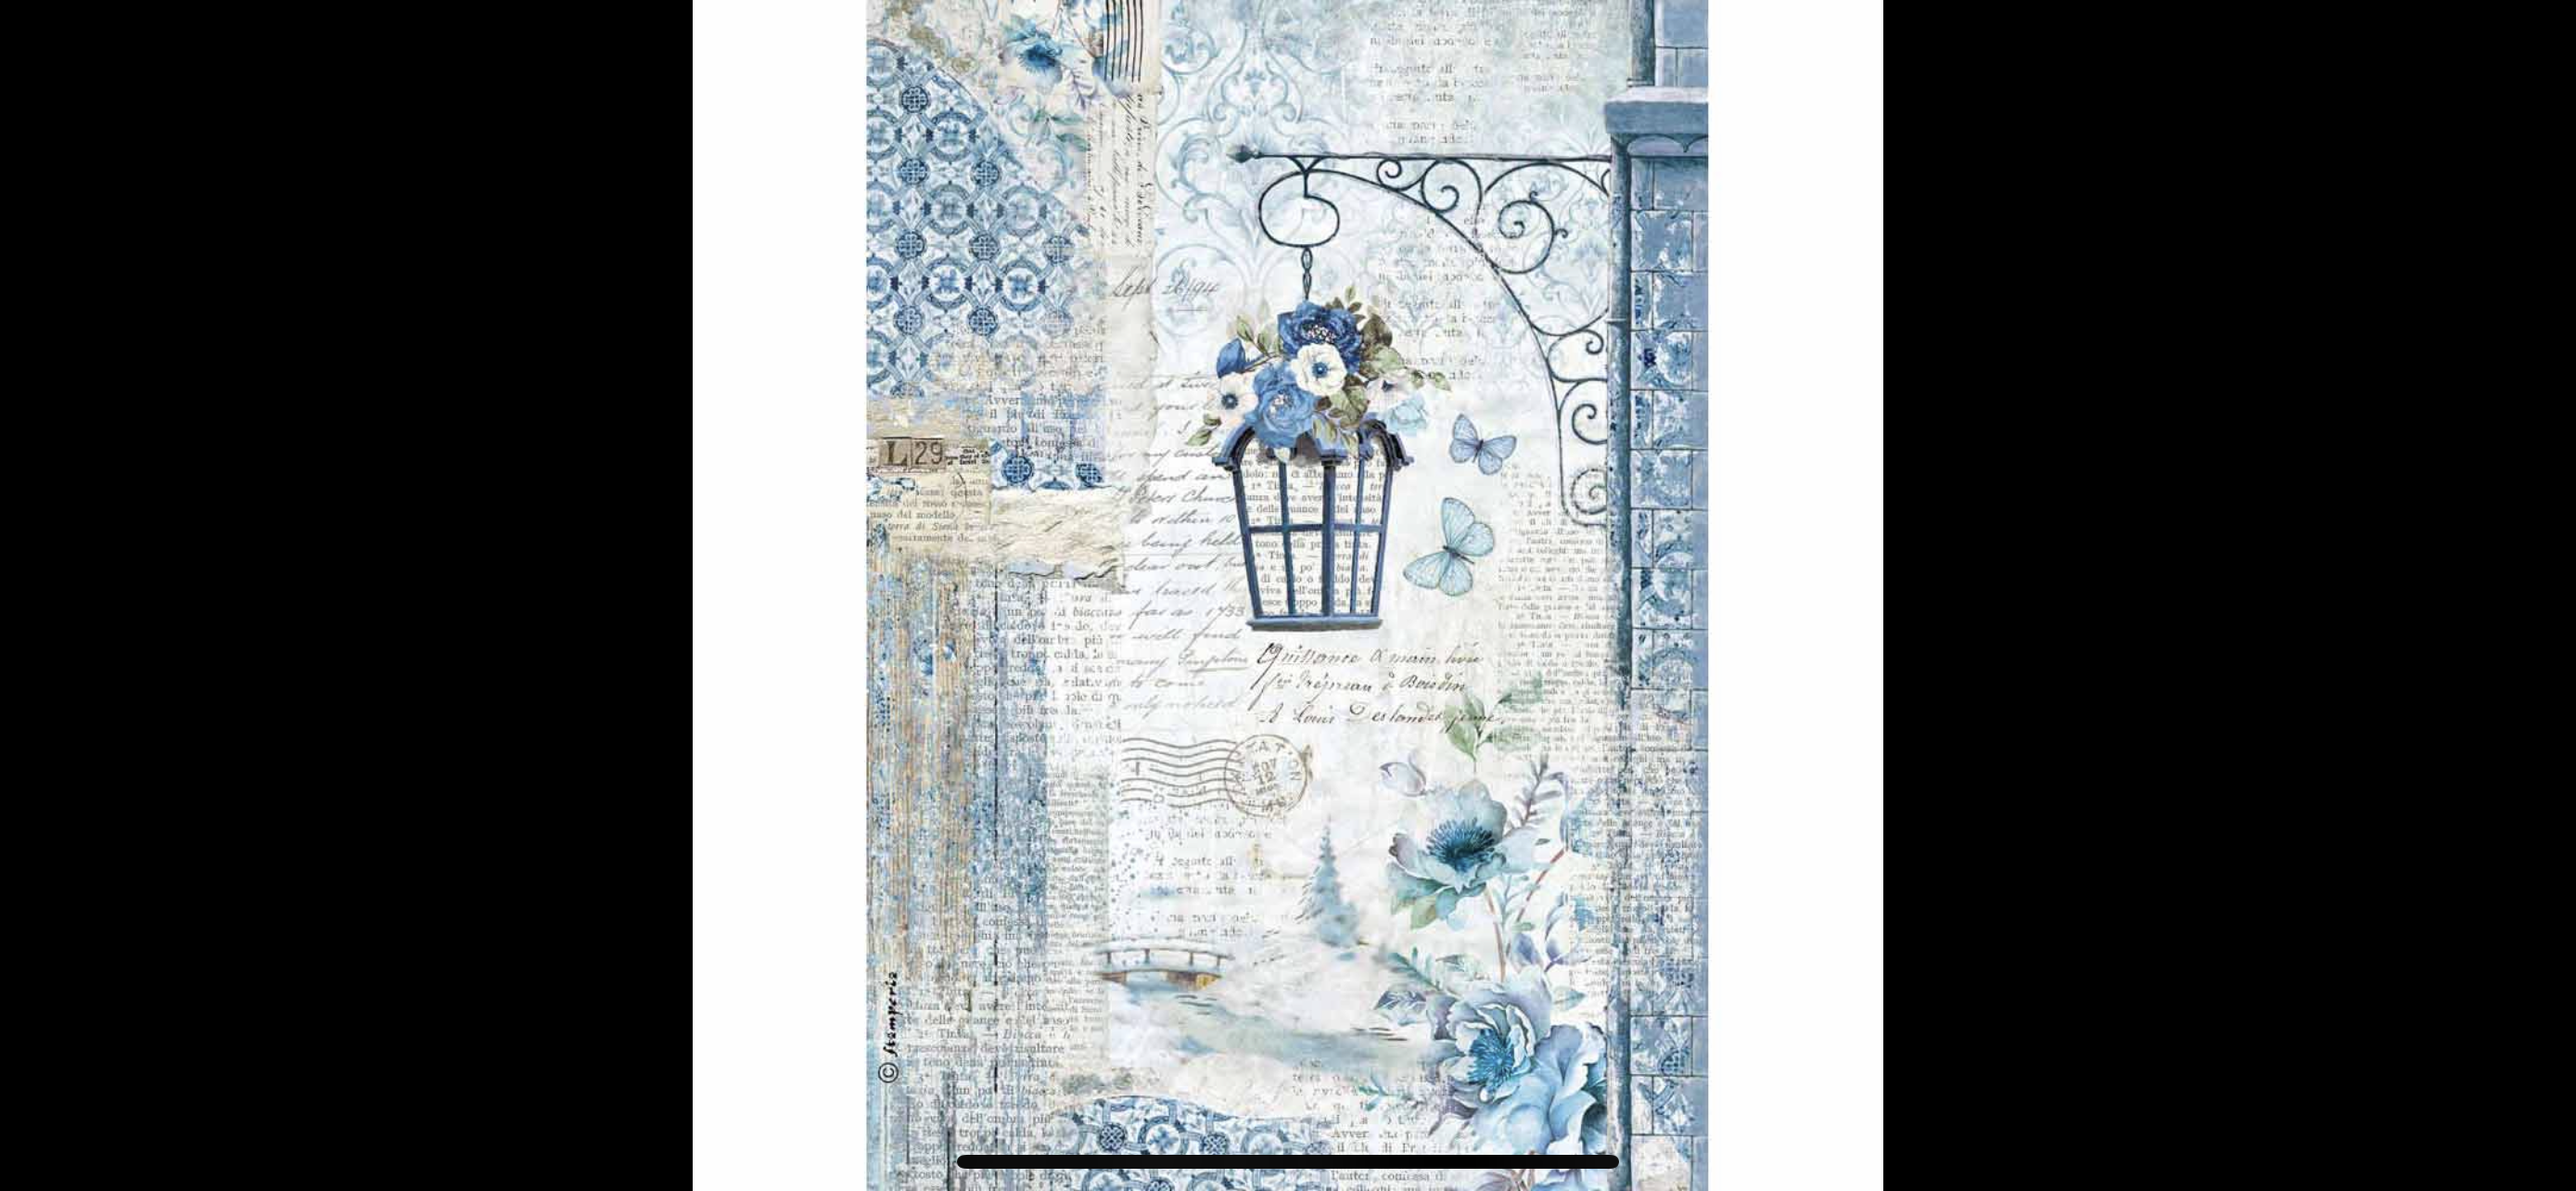 Stamperia Lady Vagabond Lifestyle Library A4 Decoupage Paper - TH